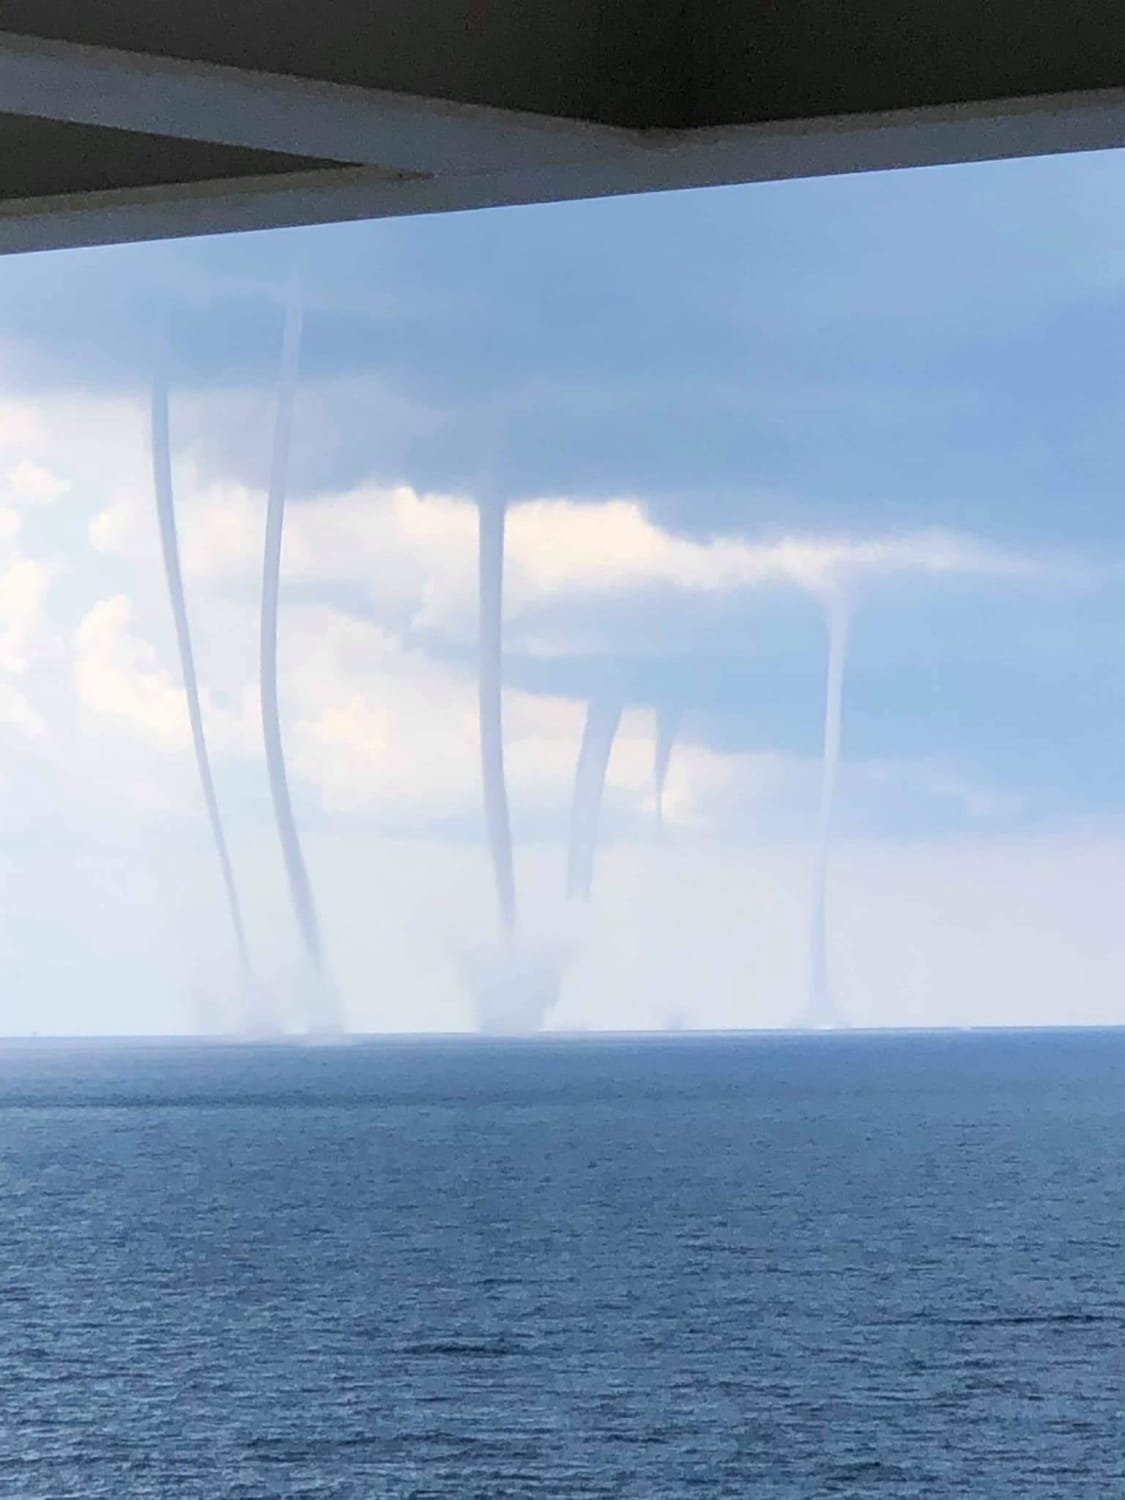 This image of 6 waterspouts in the Gulf of Mexico. (Image credit: Frank Leday)